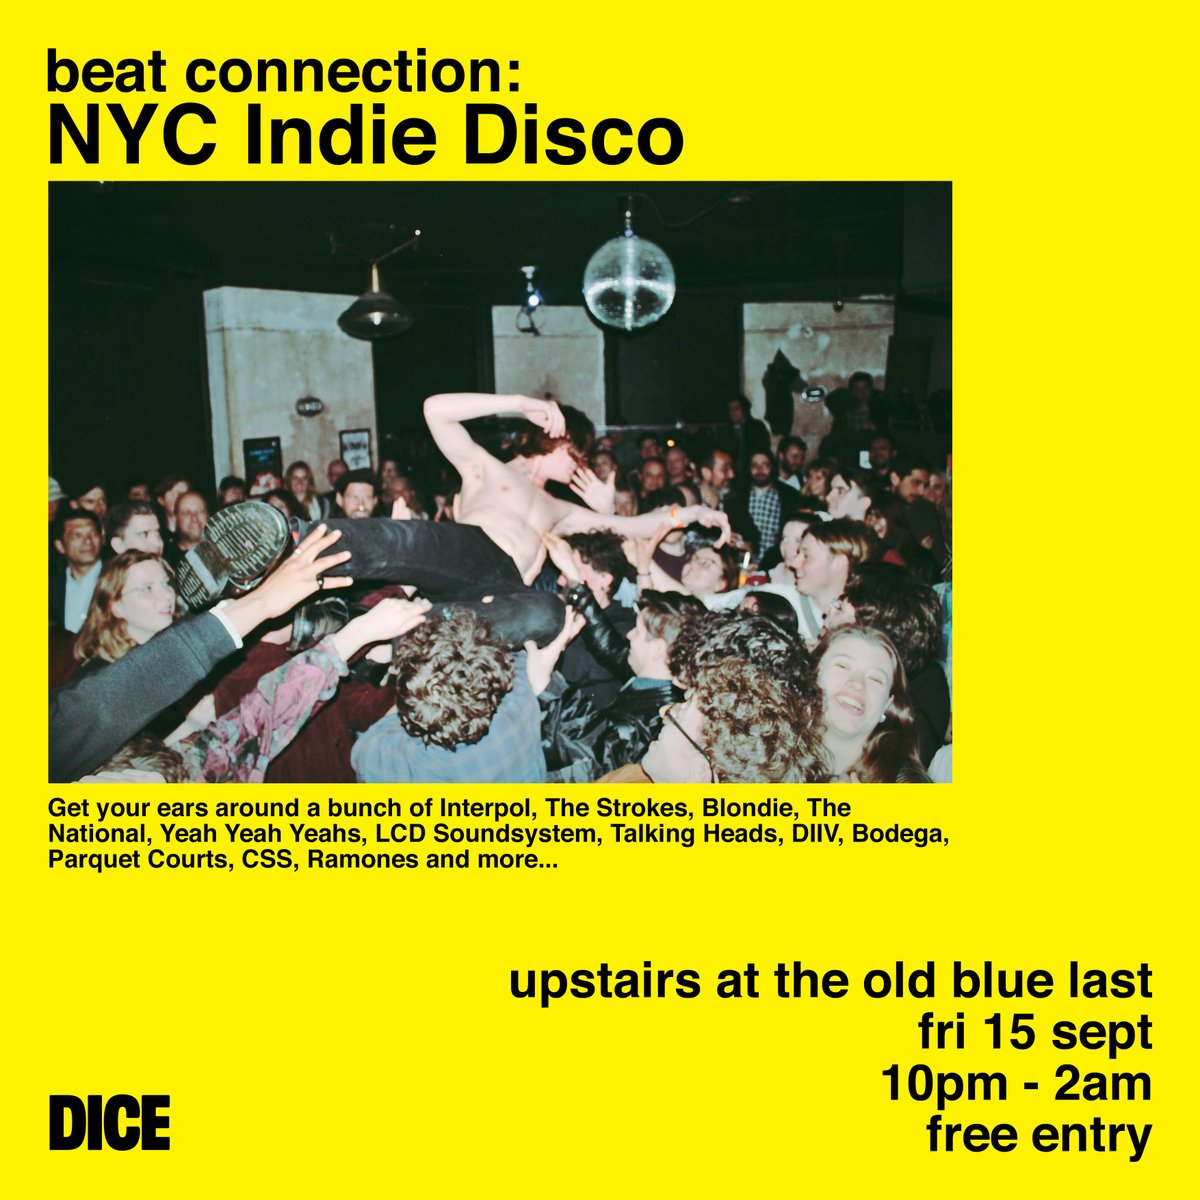 Big Friday night with a NYC Indie Disco - playing all the modern classics and all the greatest hits. Come dance yourself clean, free entry from 10pm-all night